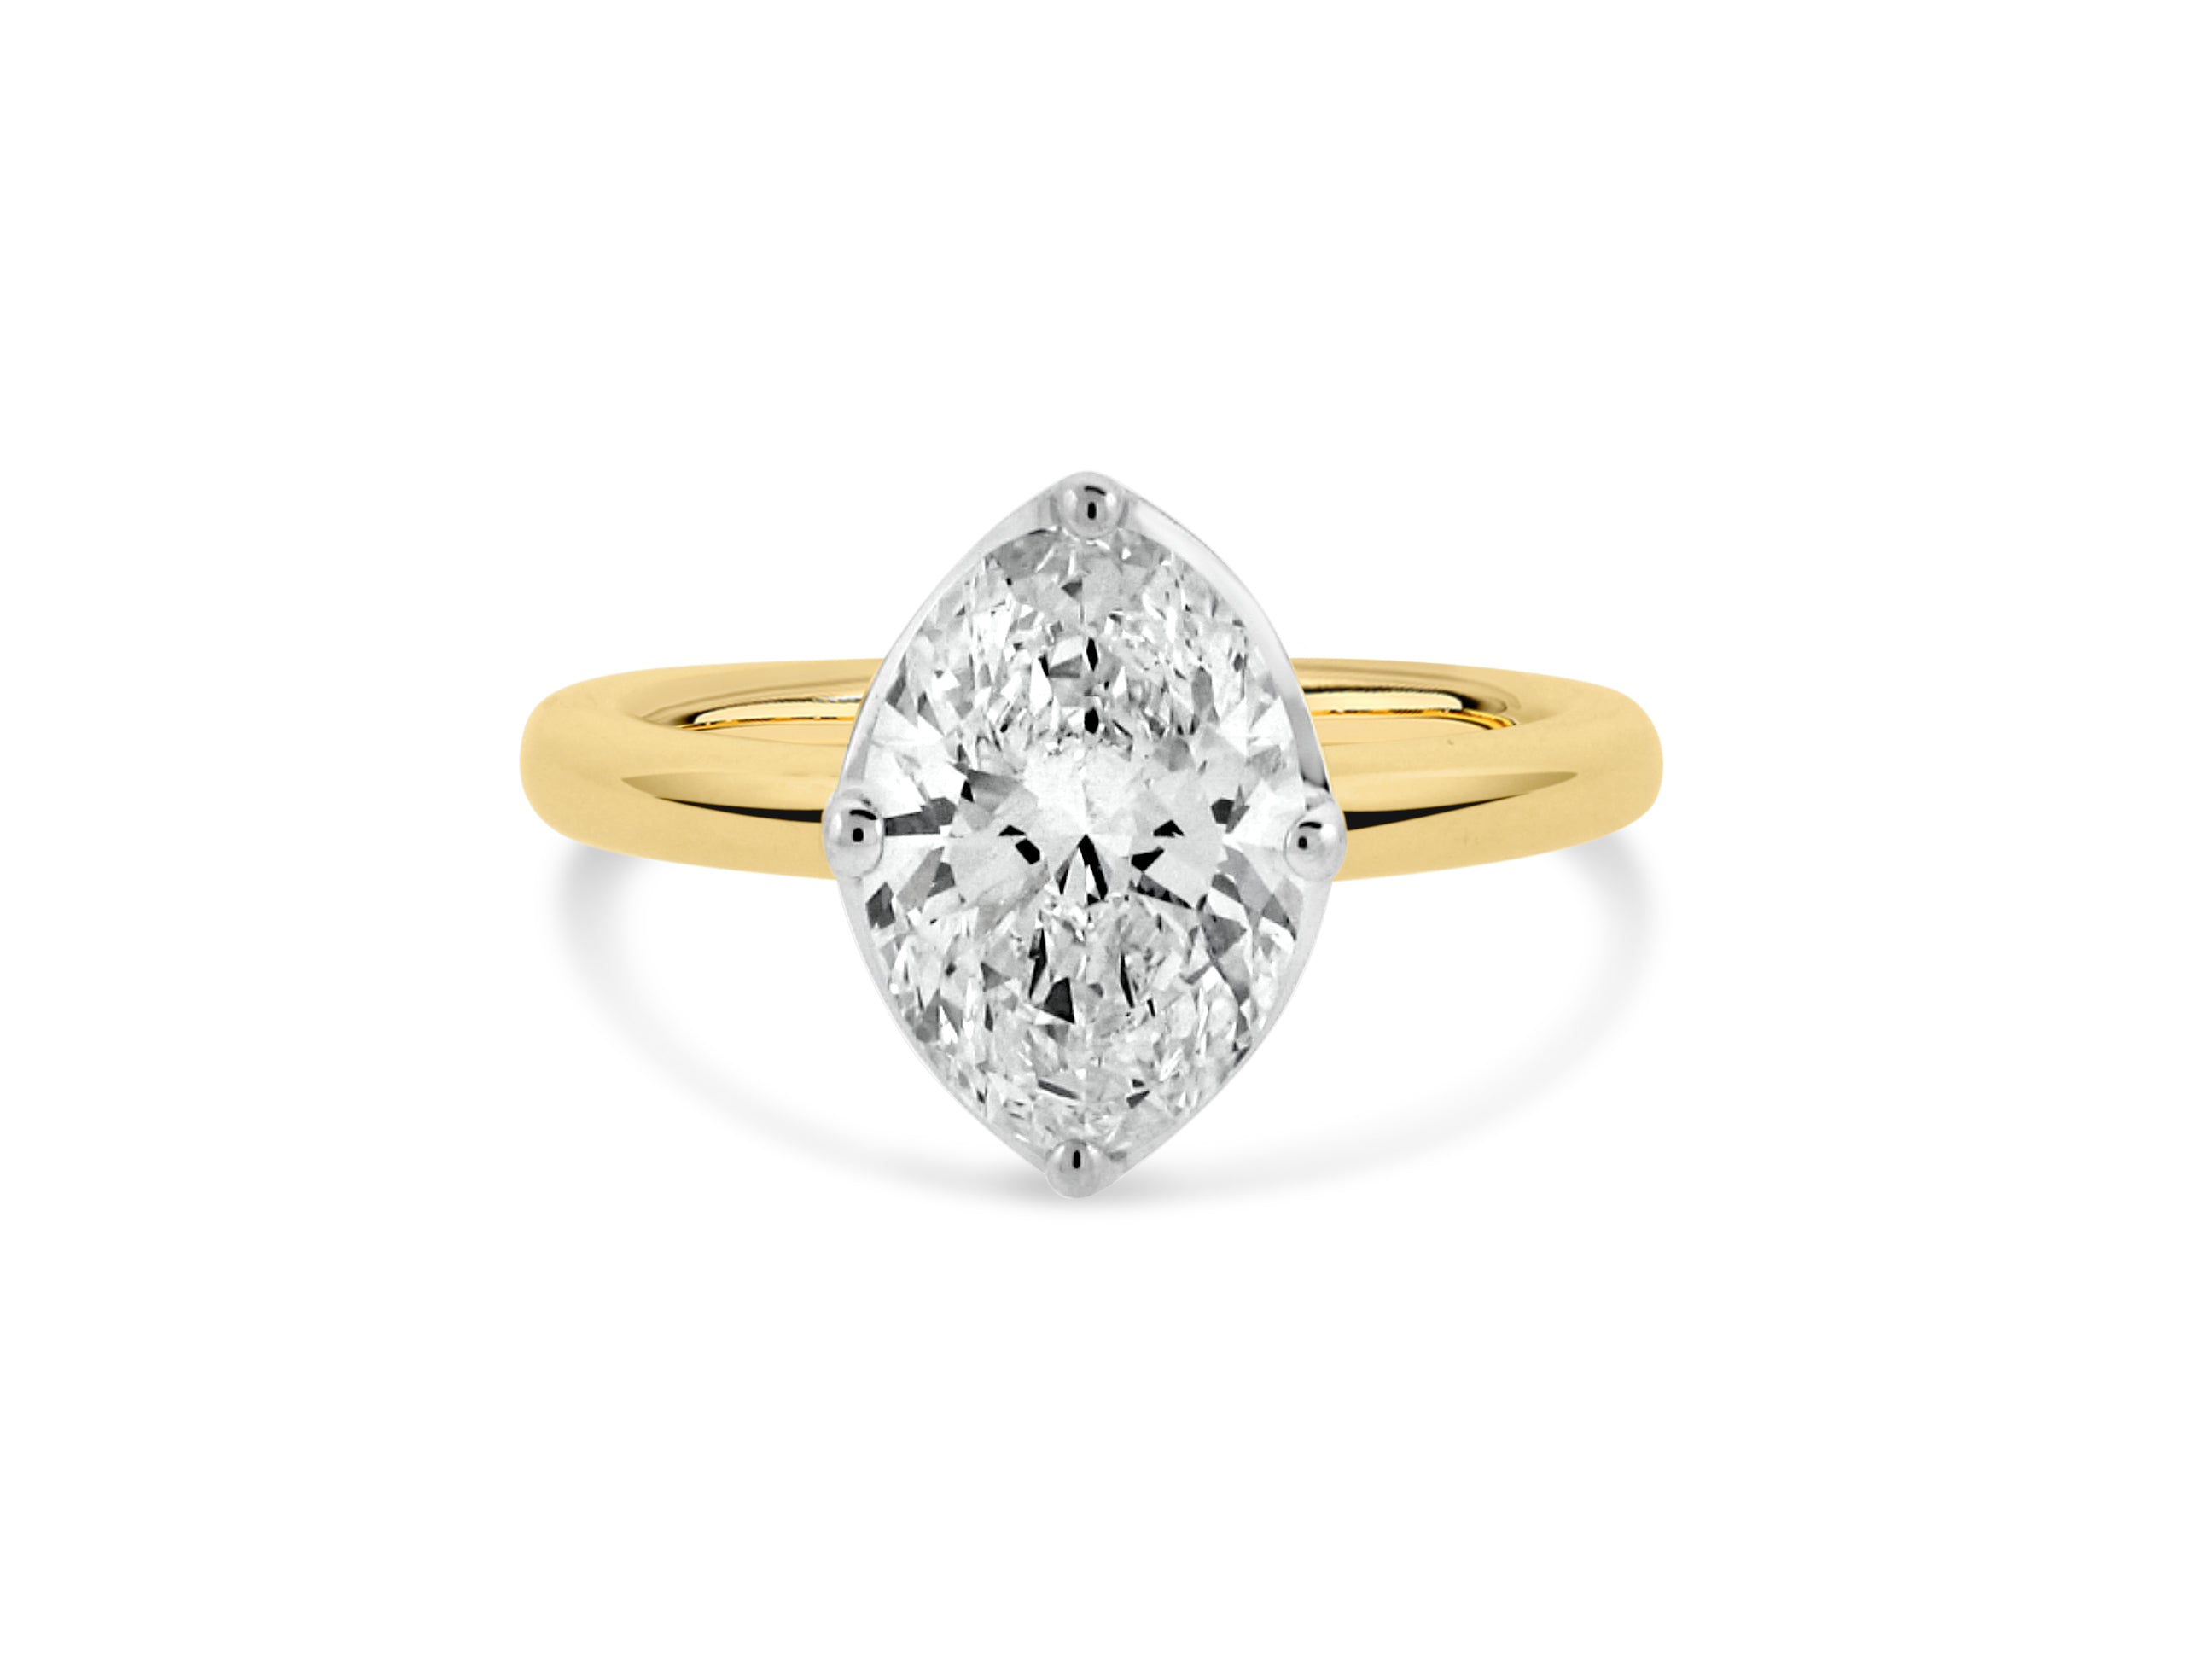 PRIVE' 18K YELLOW AND WHITE GOLD 2.47CT VS2 CLARITY AND F COLOR OVALSWAROVSKI SET WITH .25CT SI/G ACCENT NATURAL DIAMONDS - CERTIFIED